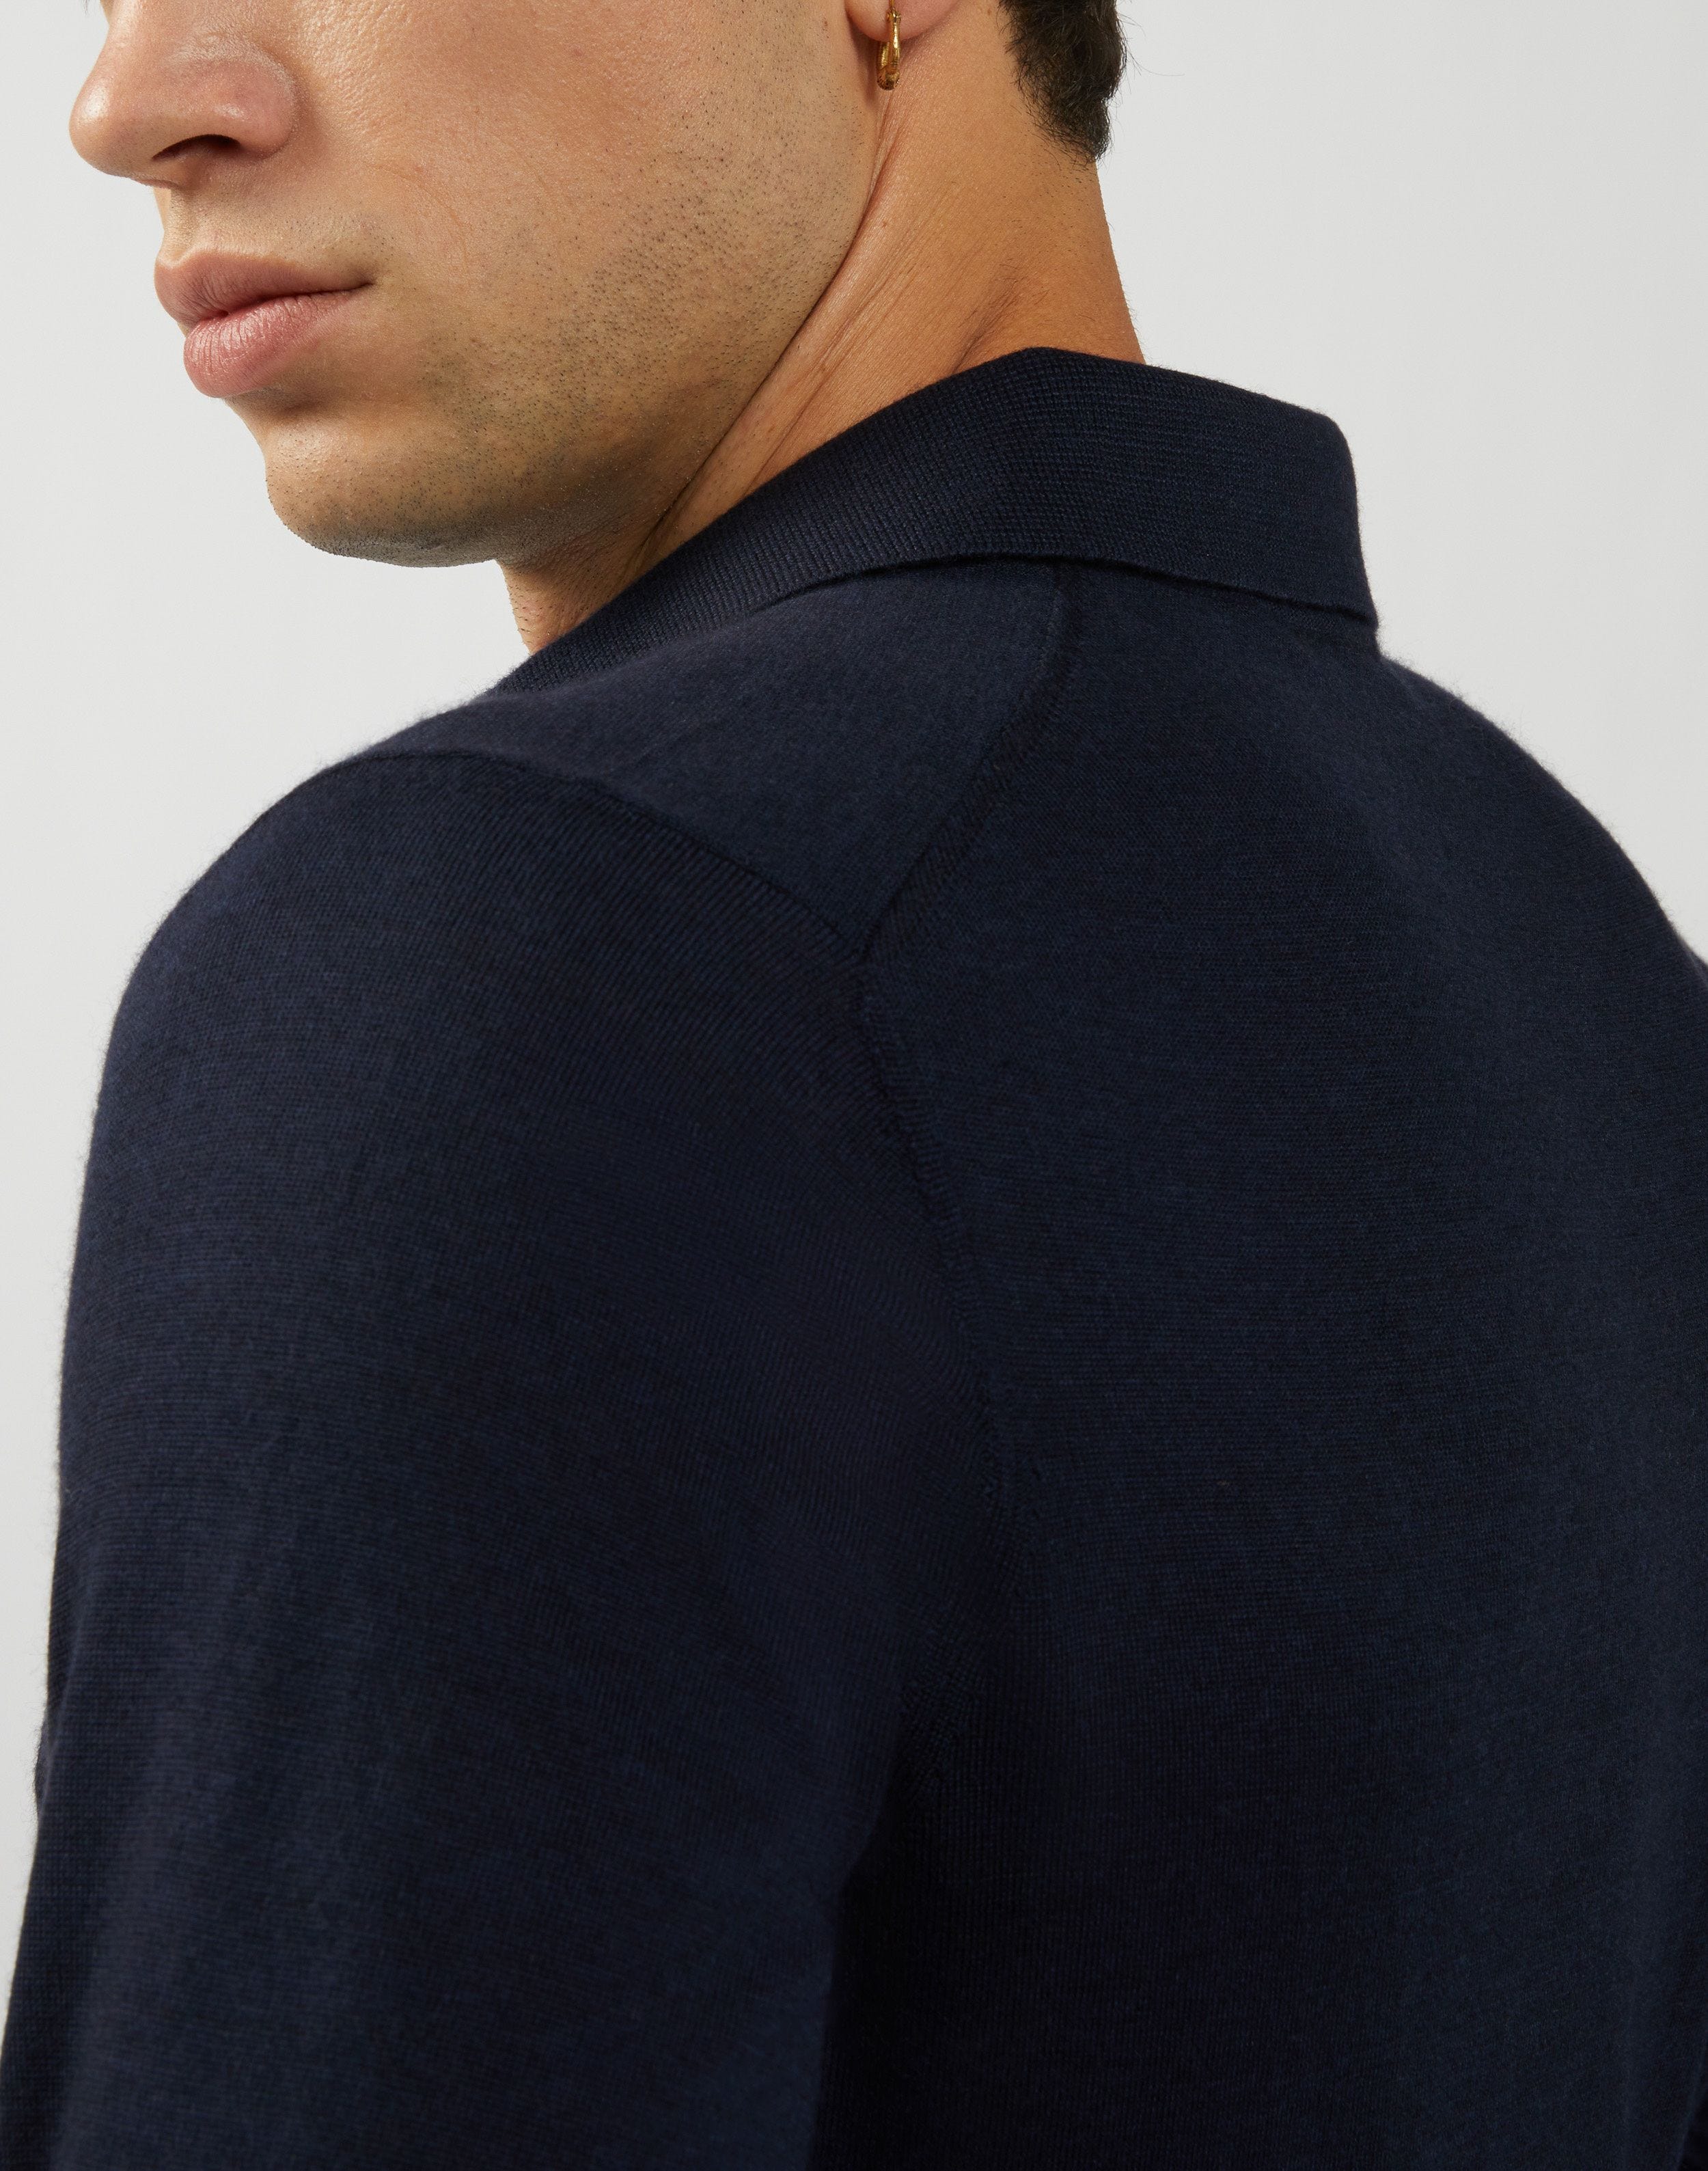 Long-sleeve polo shirt in blue cashmere